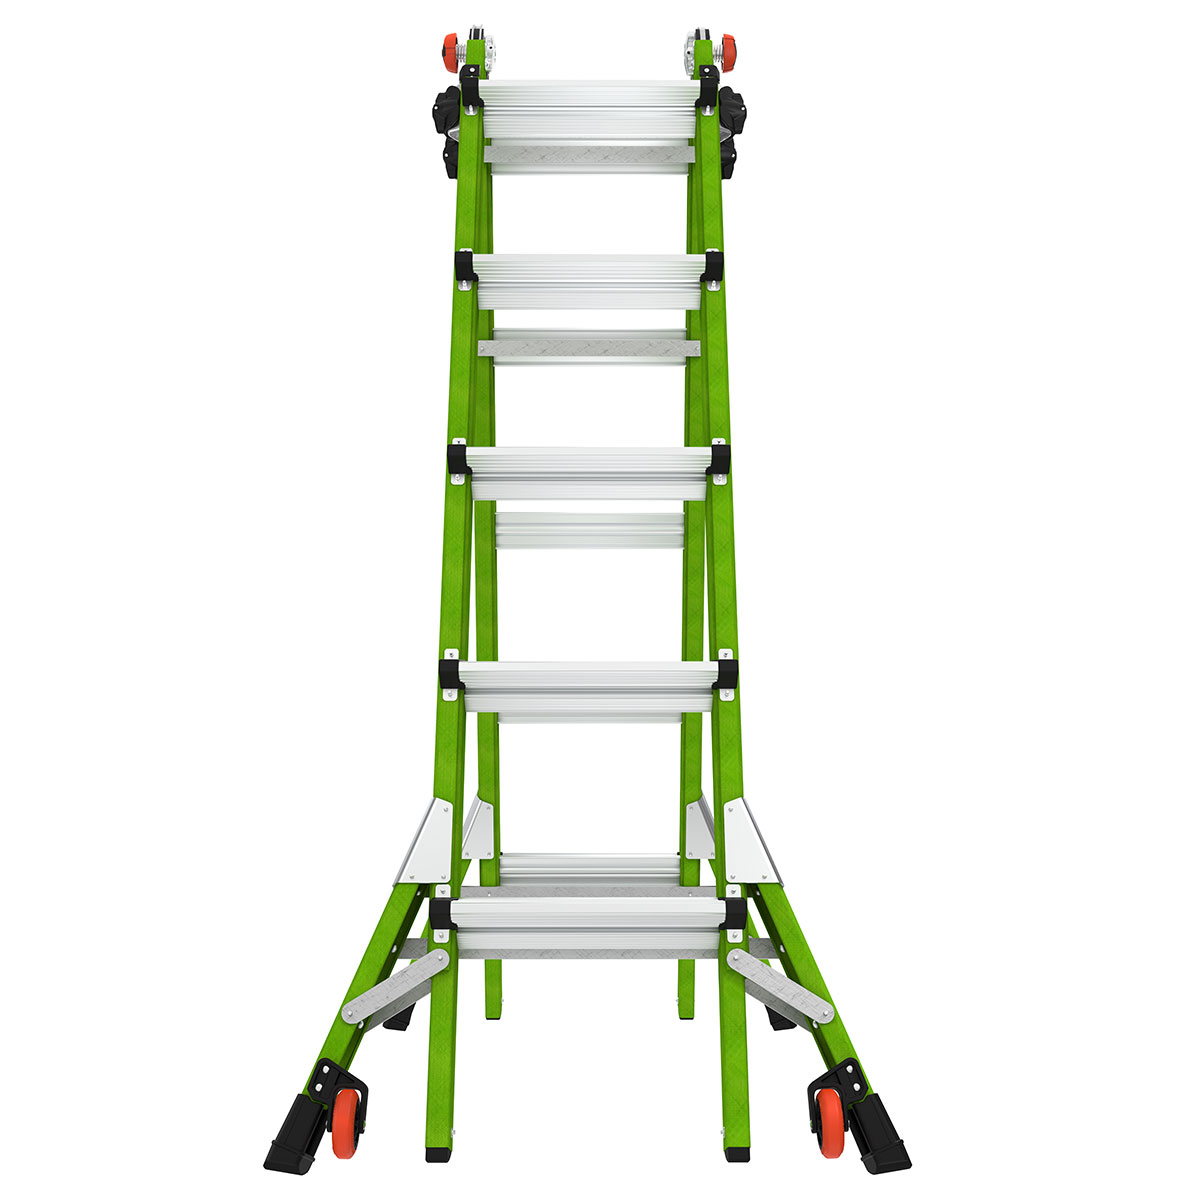 Little Giant Dark Horse 2.0 Model 22 Type 1A Ladder from Columbia Safety